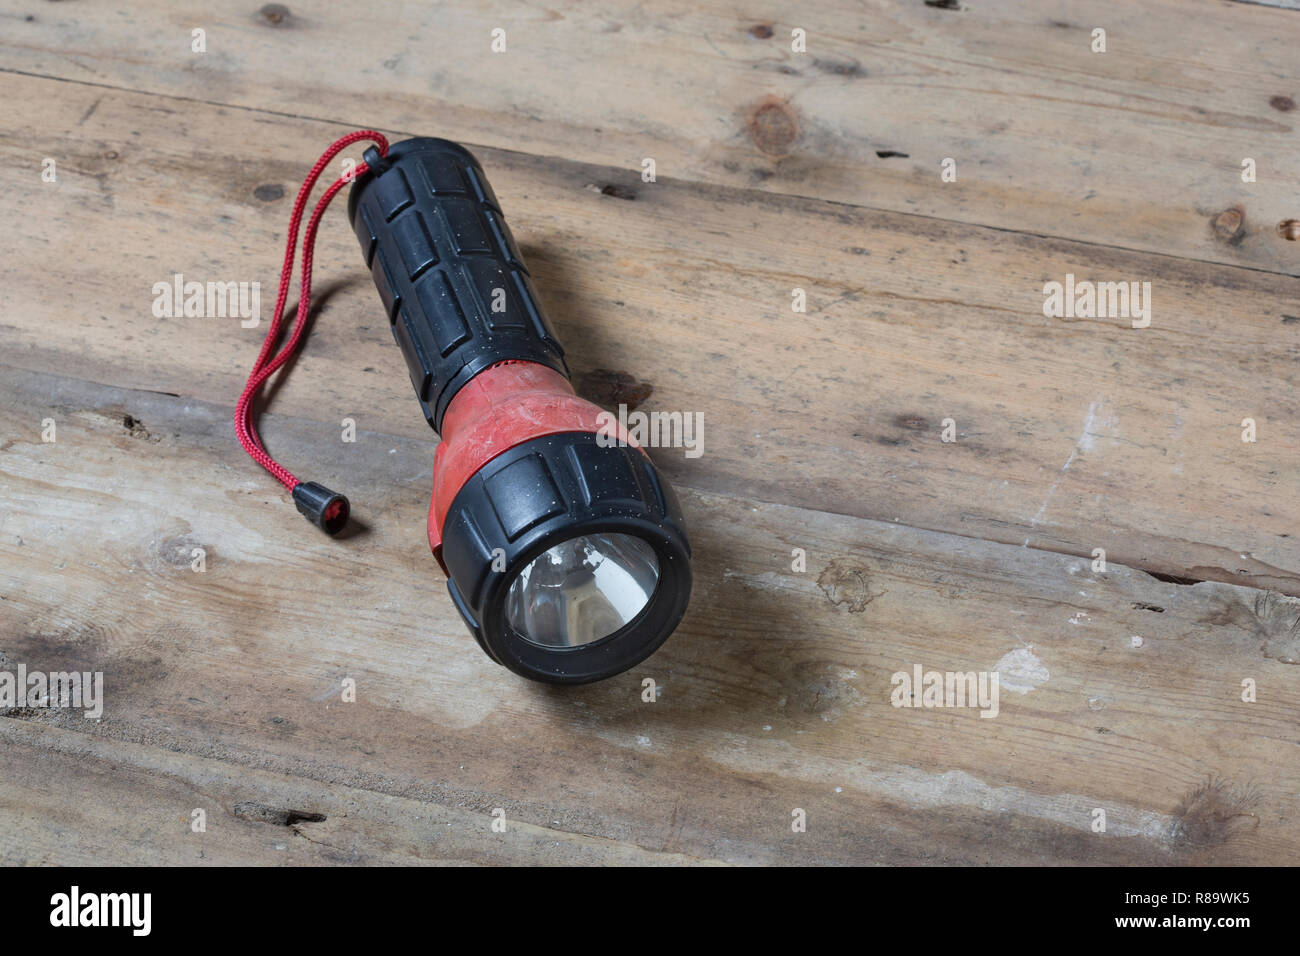 An old red and black rubber torch Stock Photo